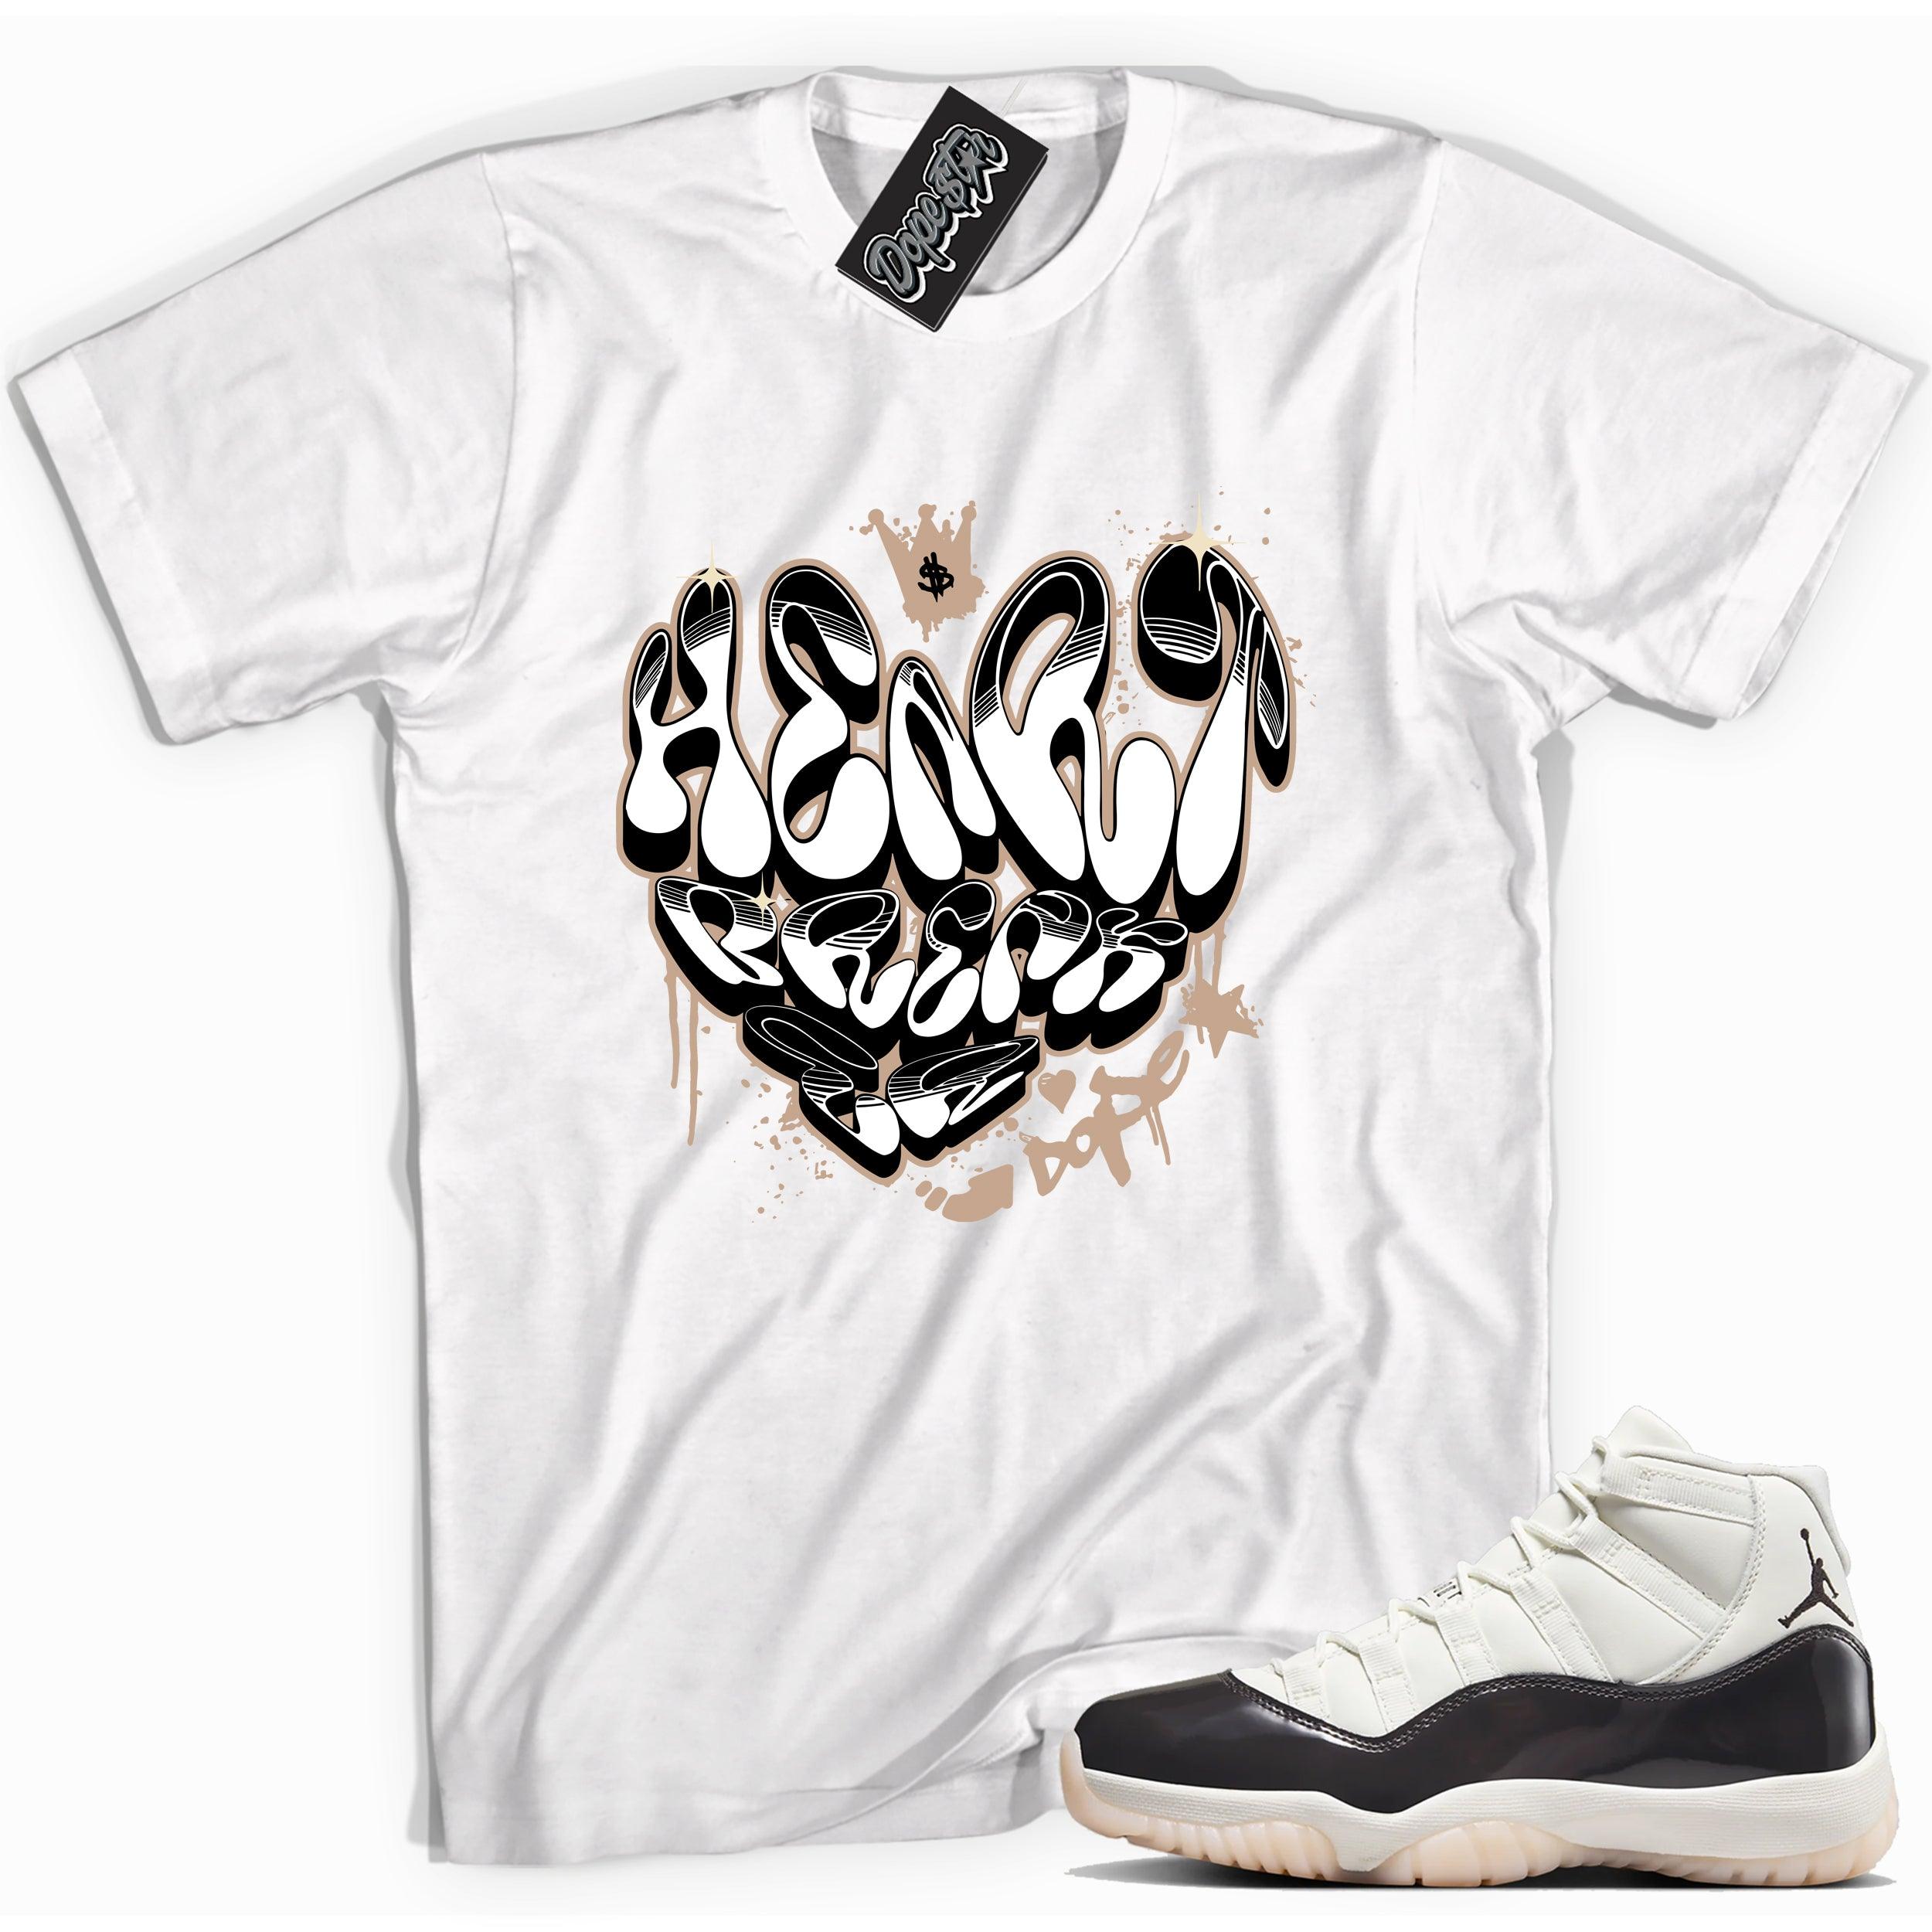 Cool White graphic tee with “ Heart Breaker ” print, that perfectly matches Air Jordan 11 Neapolitan sneakers 